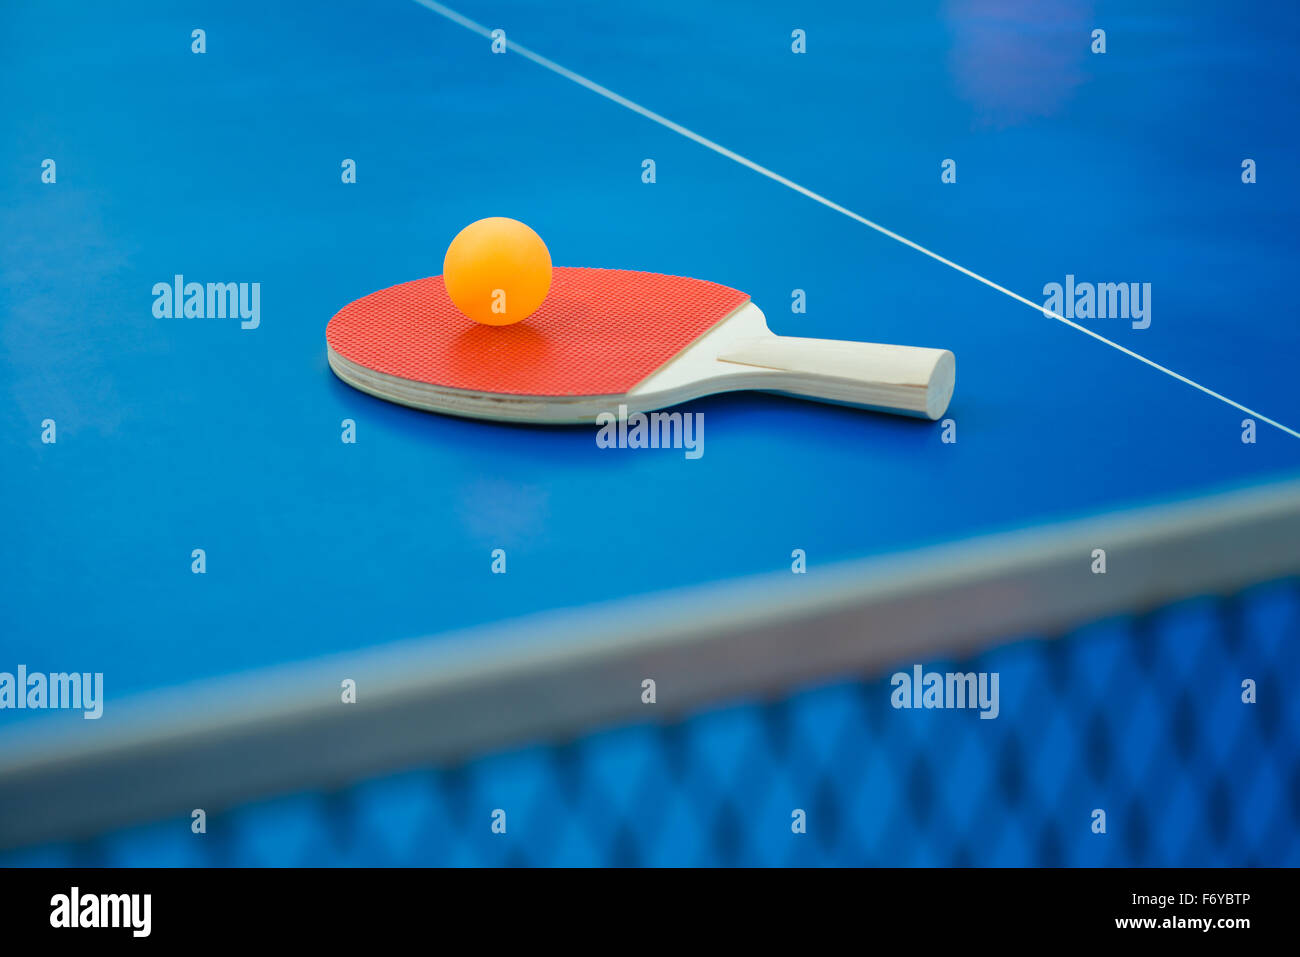 pingpong racket and ball and net on a blue pingpong table vertical Stock Photo